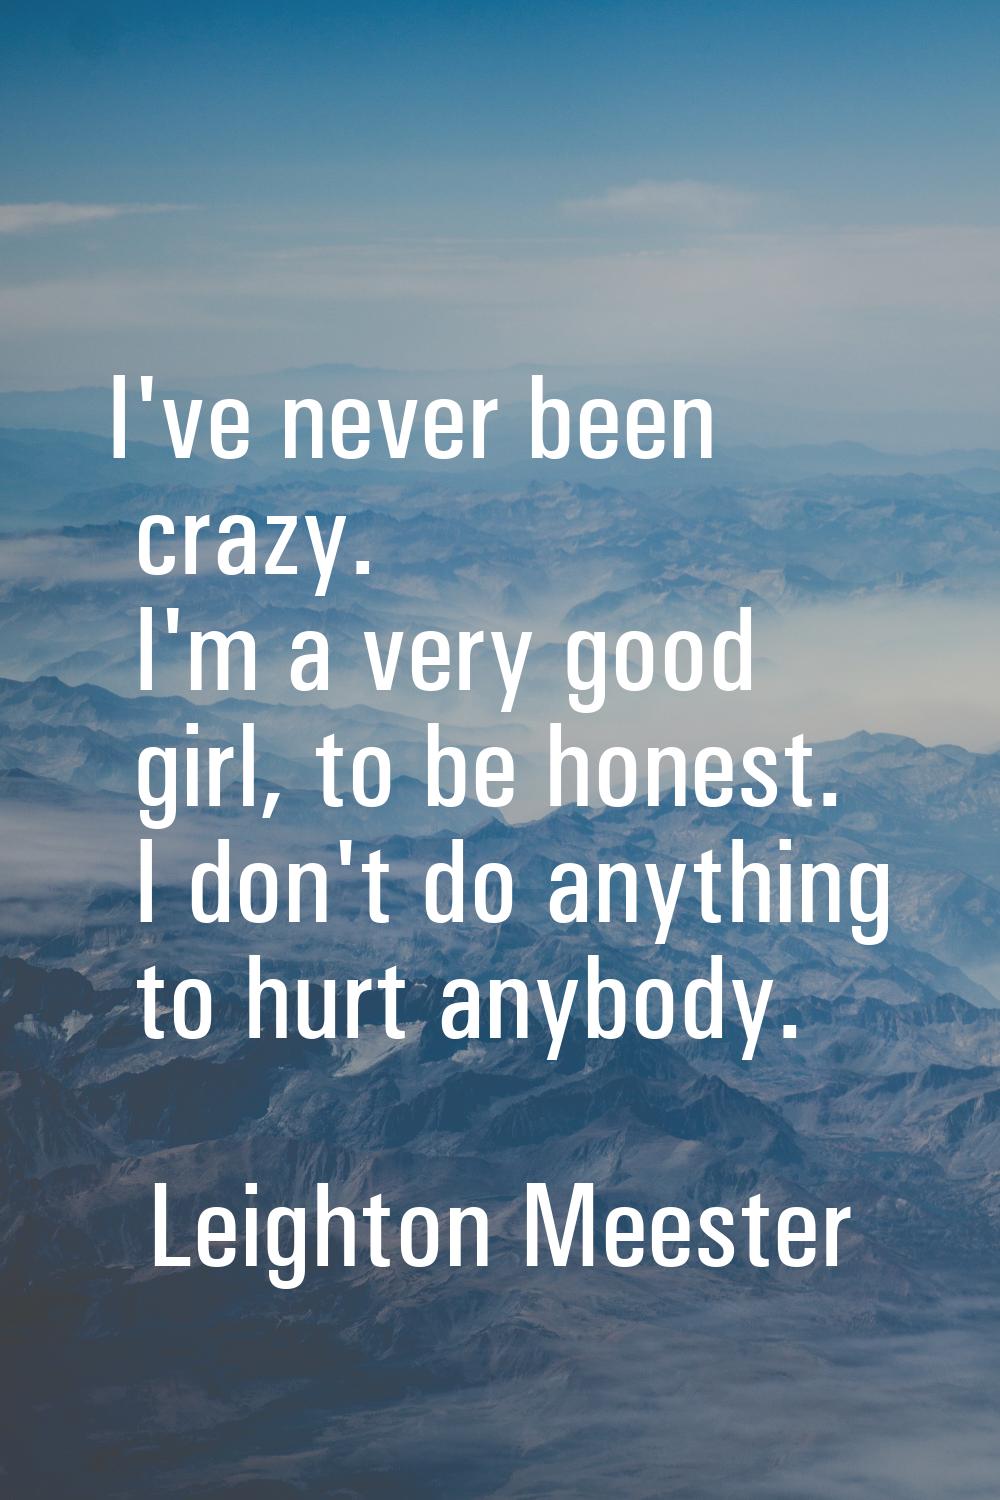 I've never been crazy. I'm a very good girl, to be honest. I don't do anything to hurt anybody.